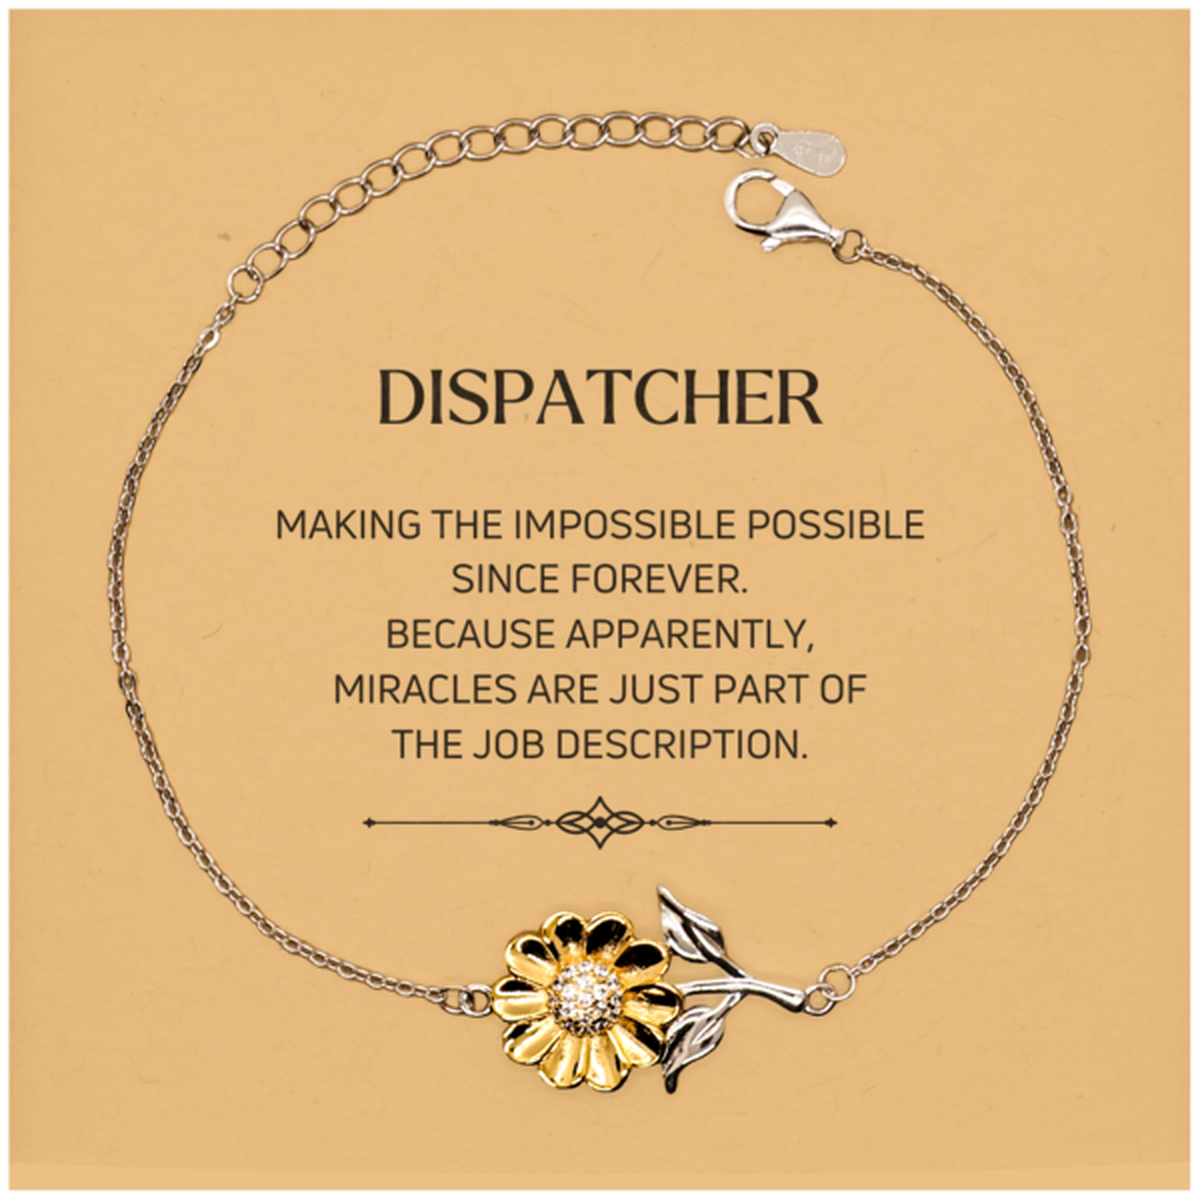 Funny Dispatcher Gifts, Miracles are just part of the job description, Inspirational Birthday Christmas Sunflower Bracelet For Dispatcher, Men, Women, Coworkers, Friends, Boss